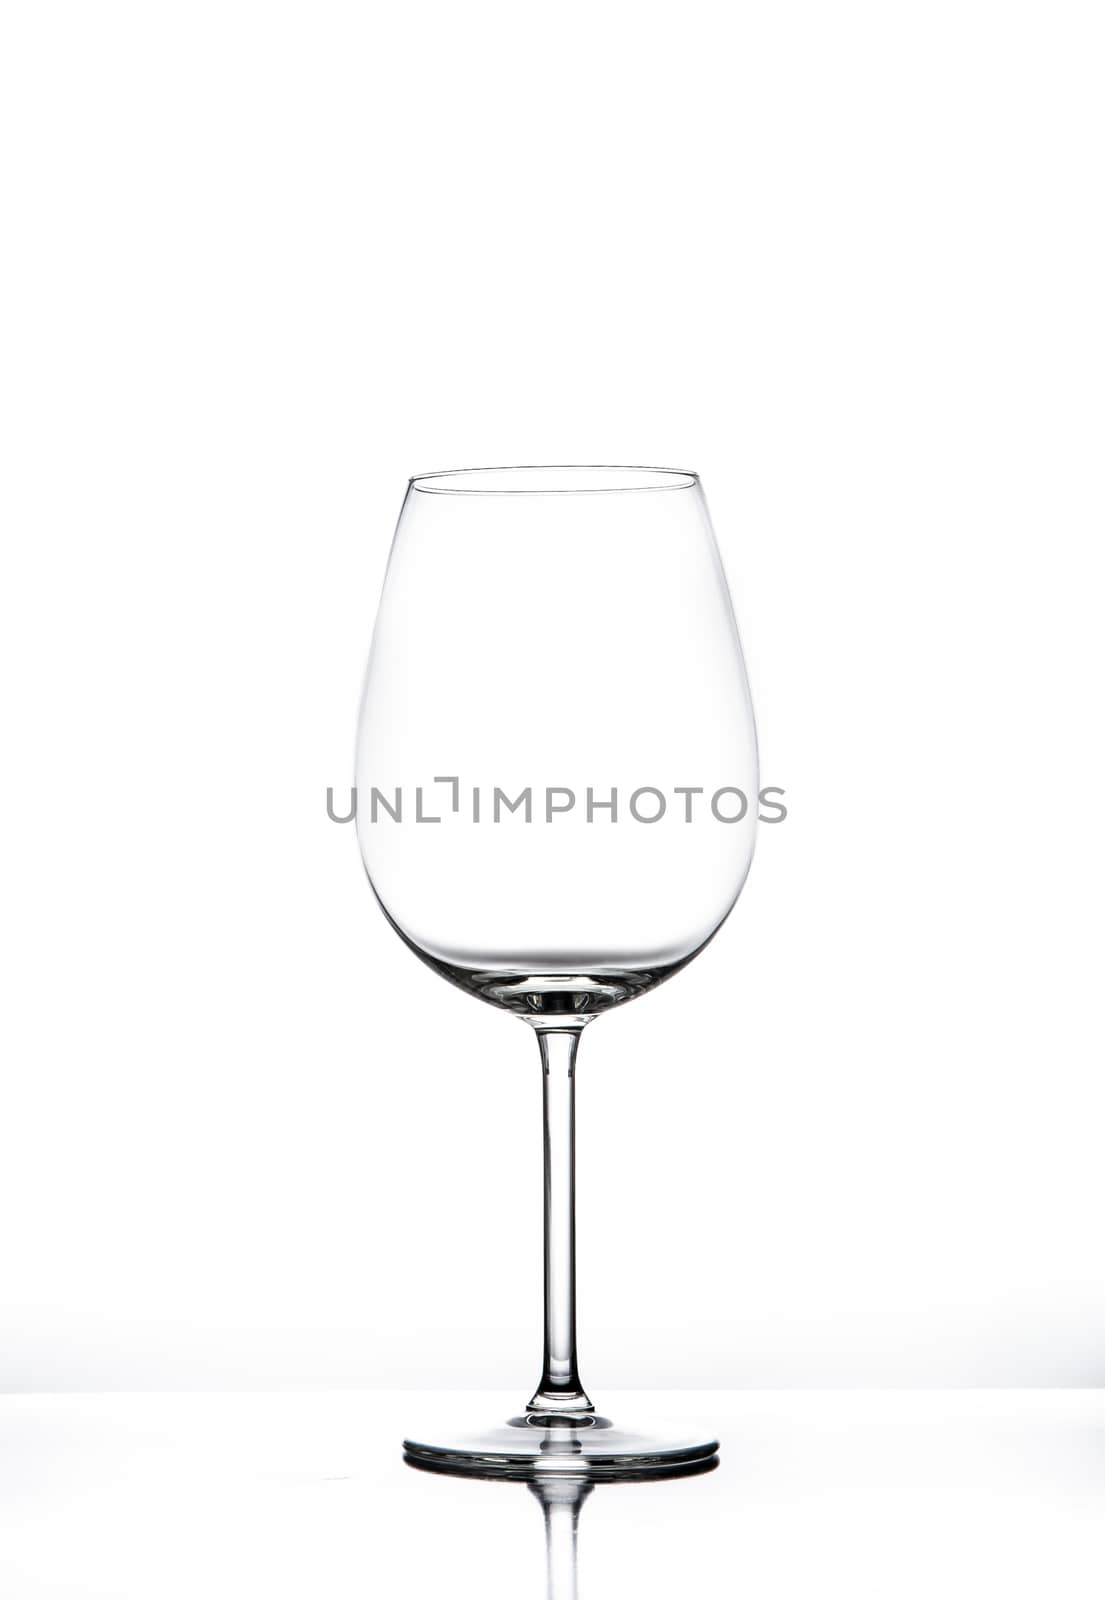 Empty wine glass isolated on white background by martinm303